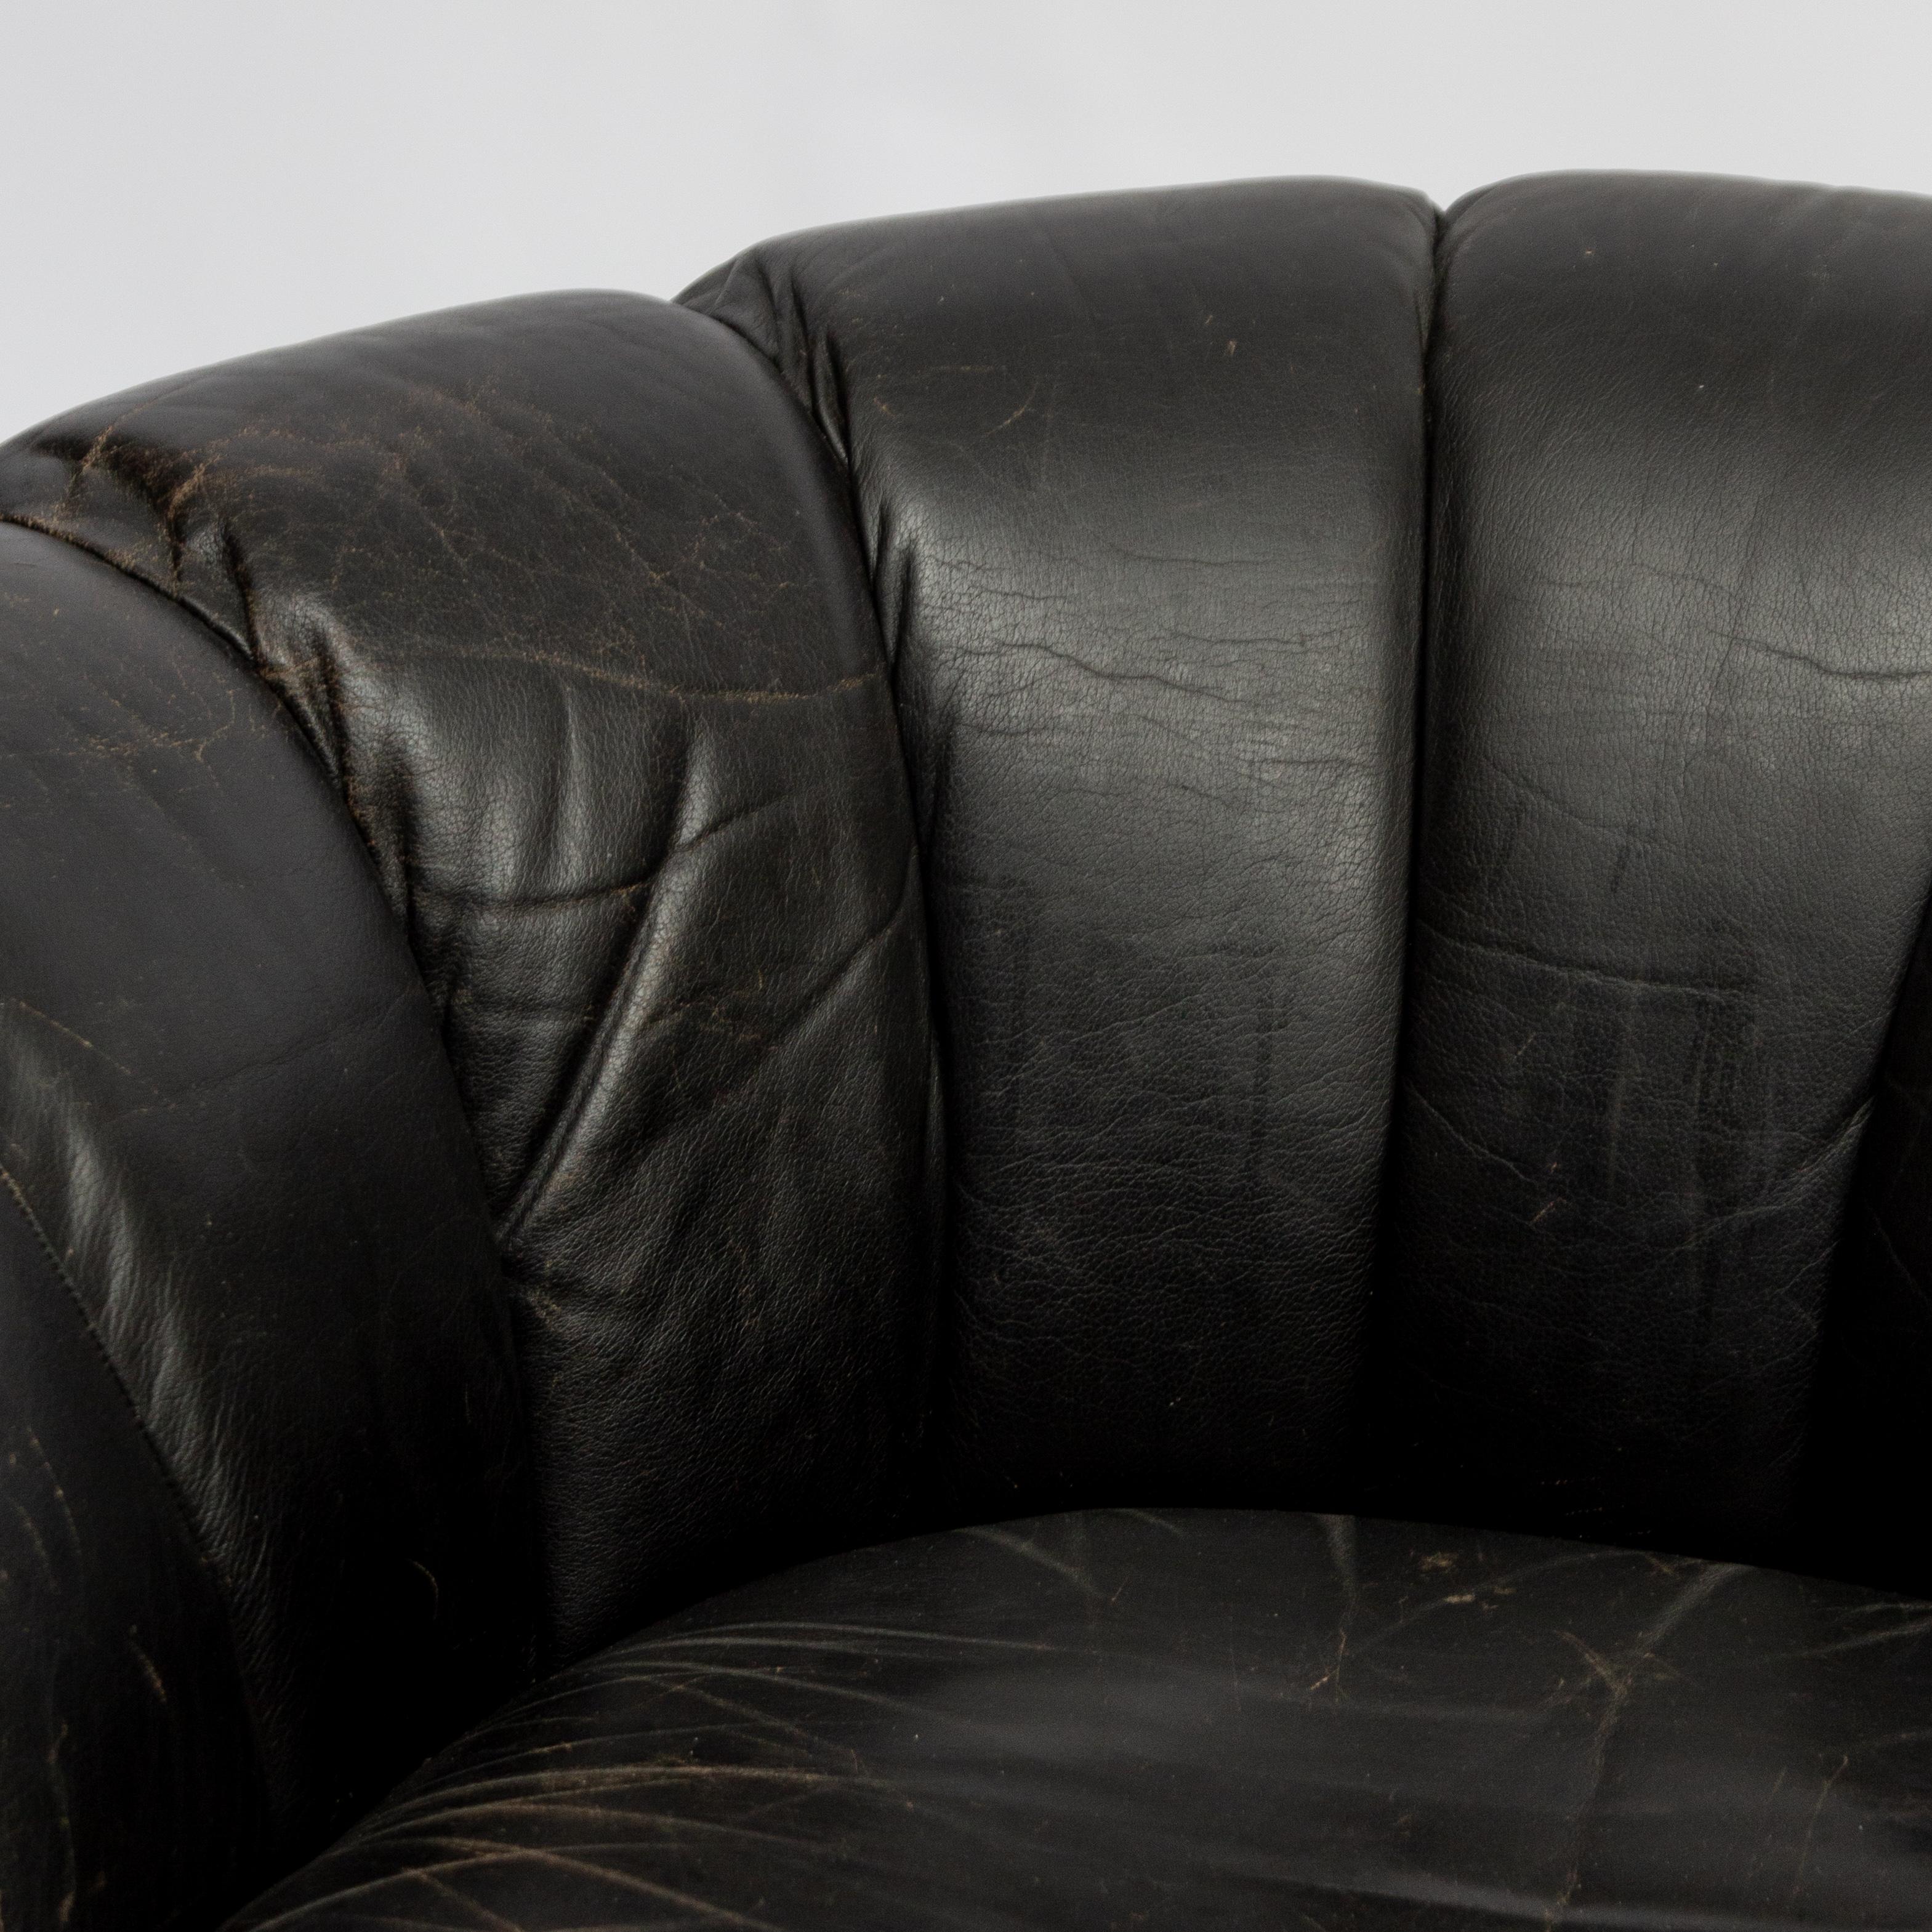 Black Leather Space Age Swivel Chair, 1970s For Sale 2